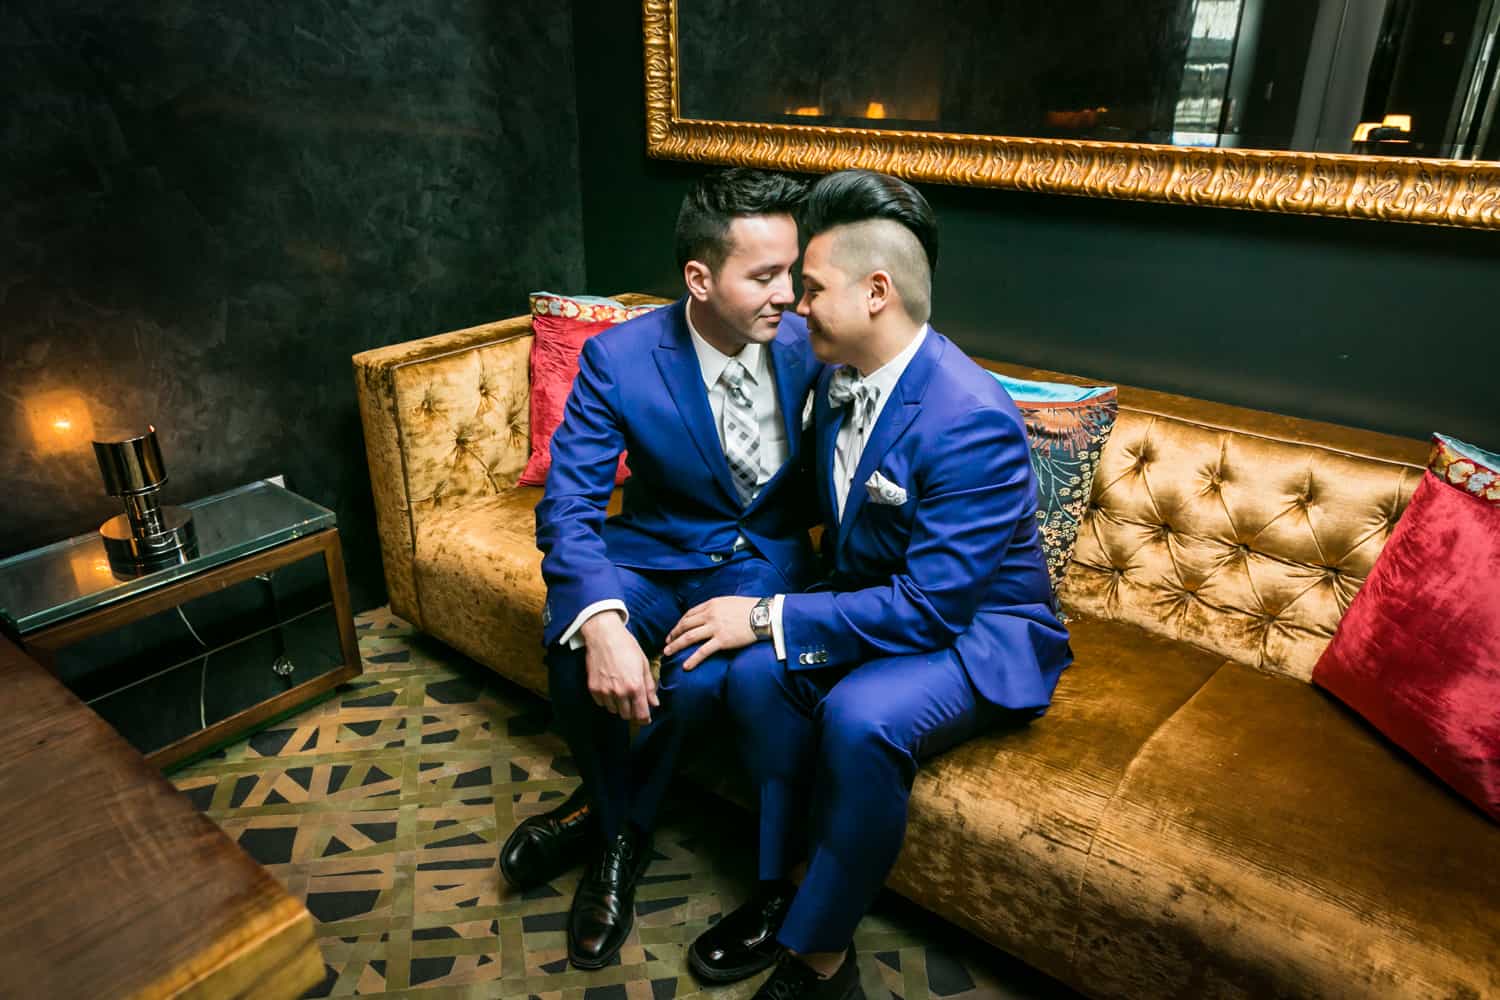 Two grooms cuddling on a couch